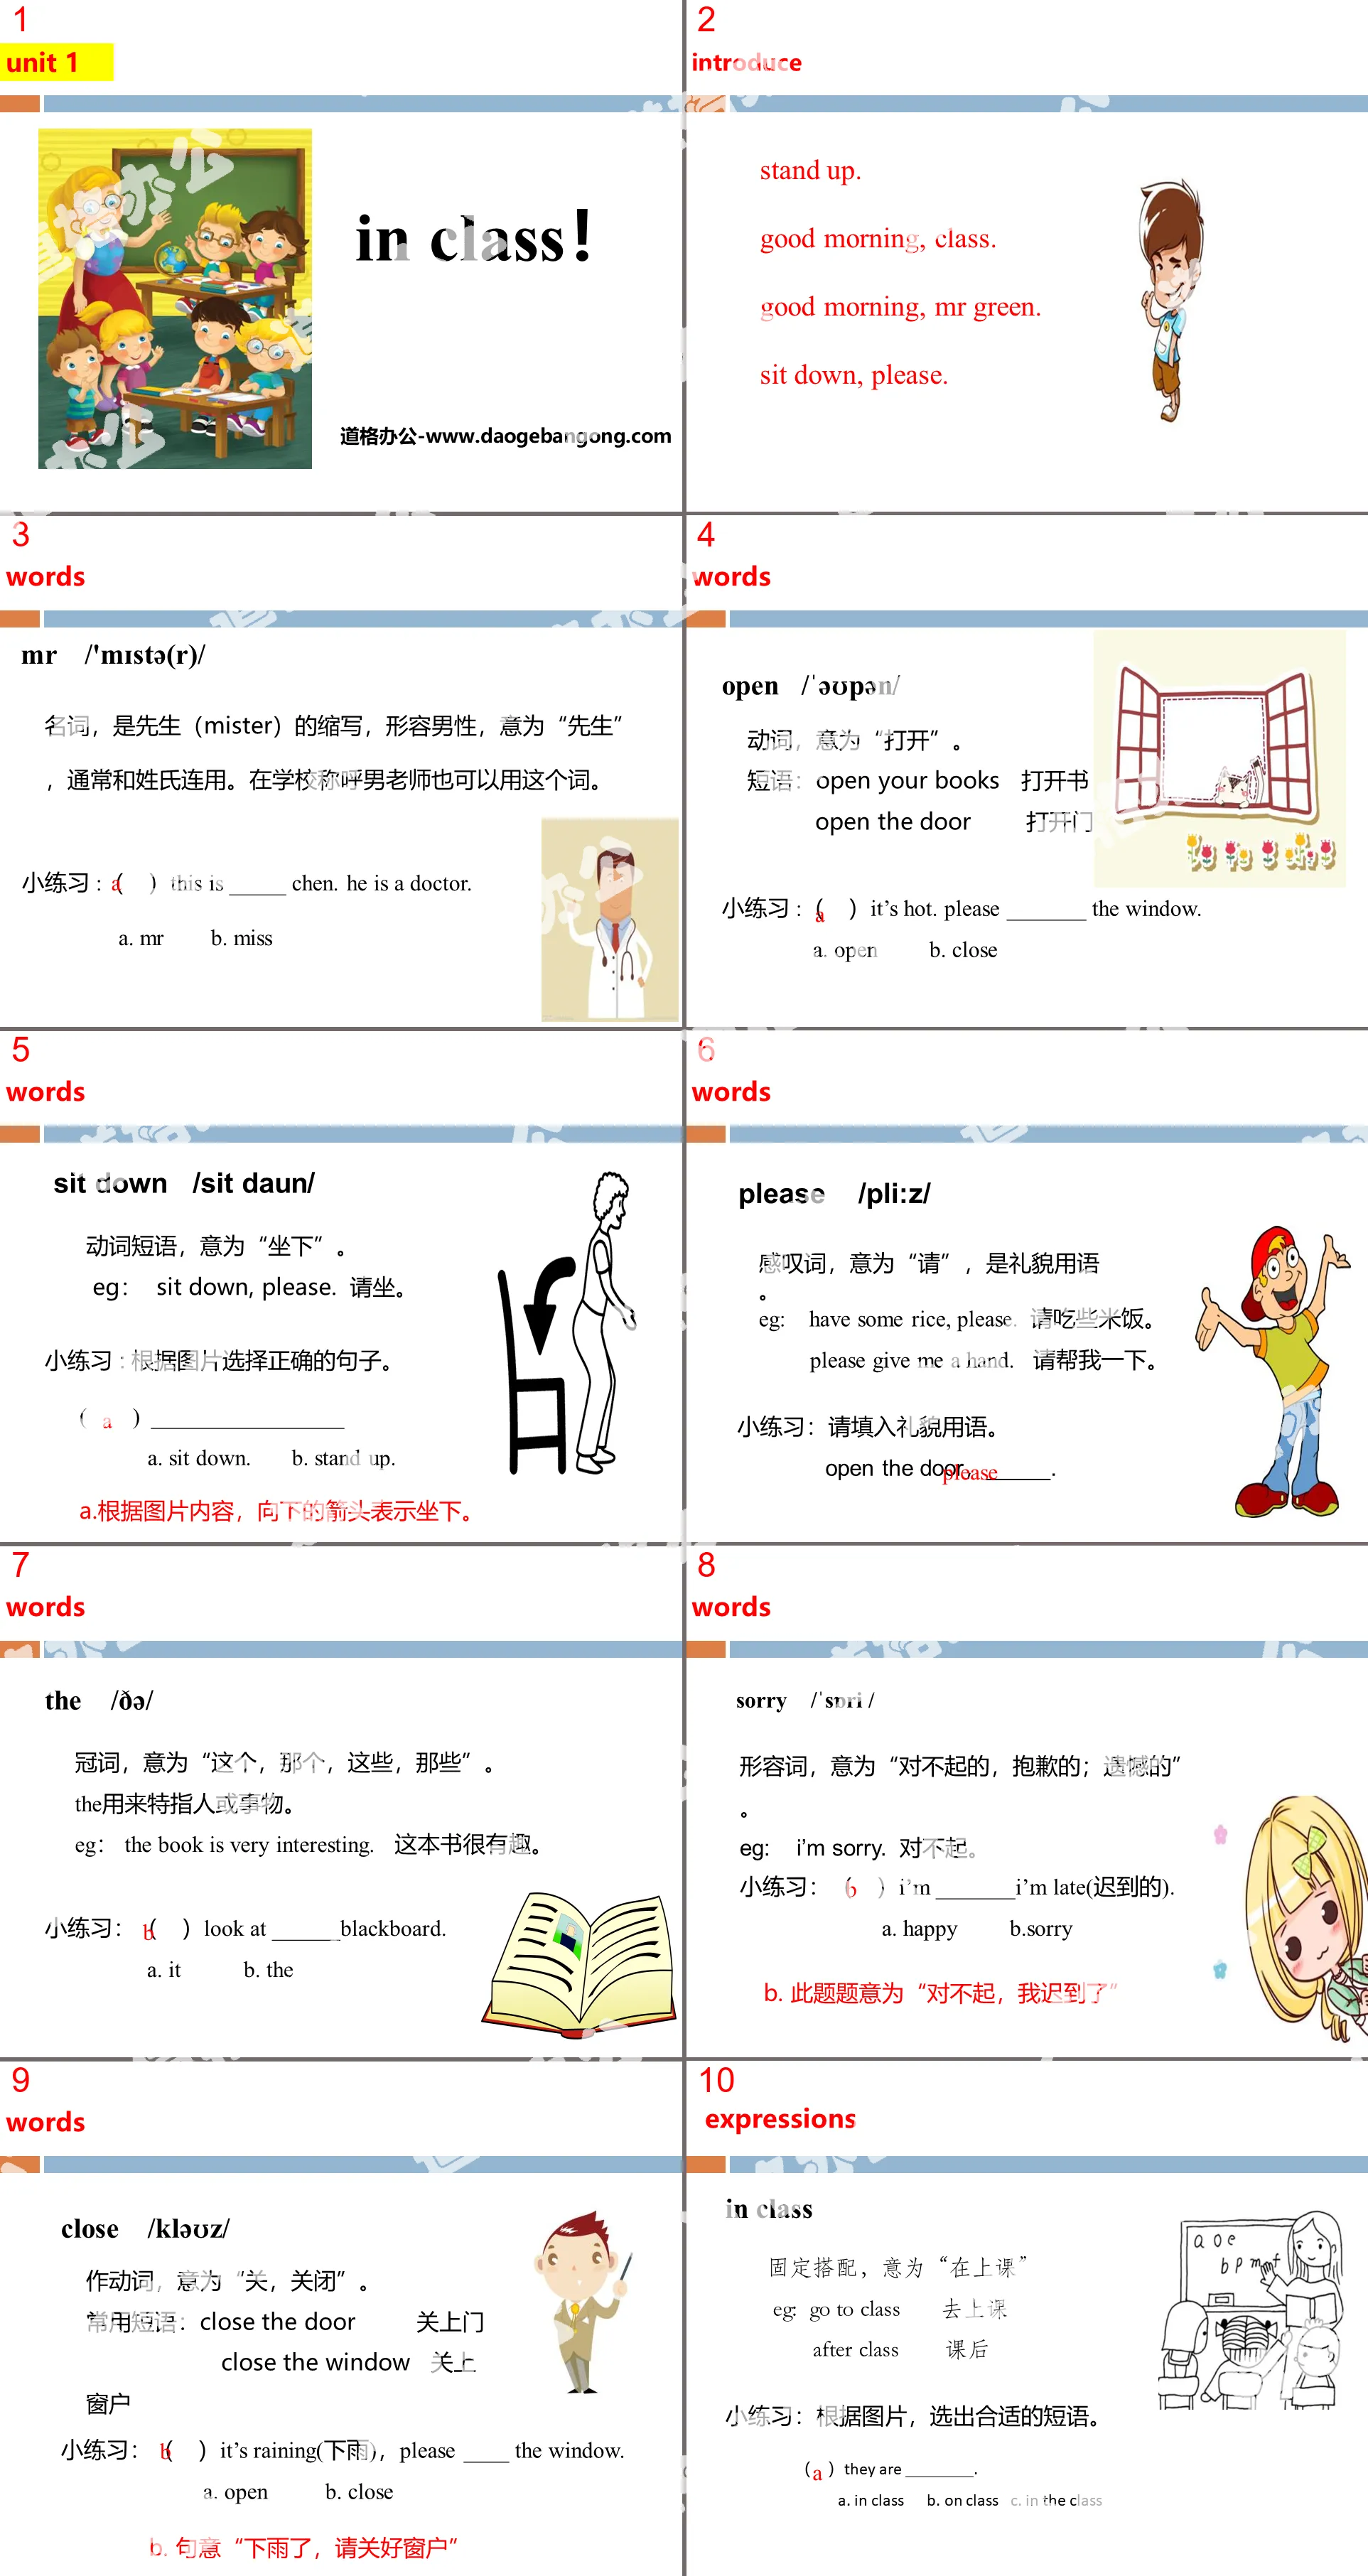 《In class!》PPT(第一课时)
